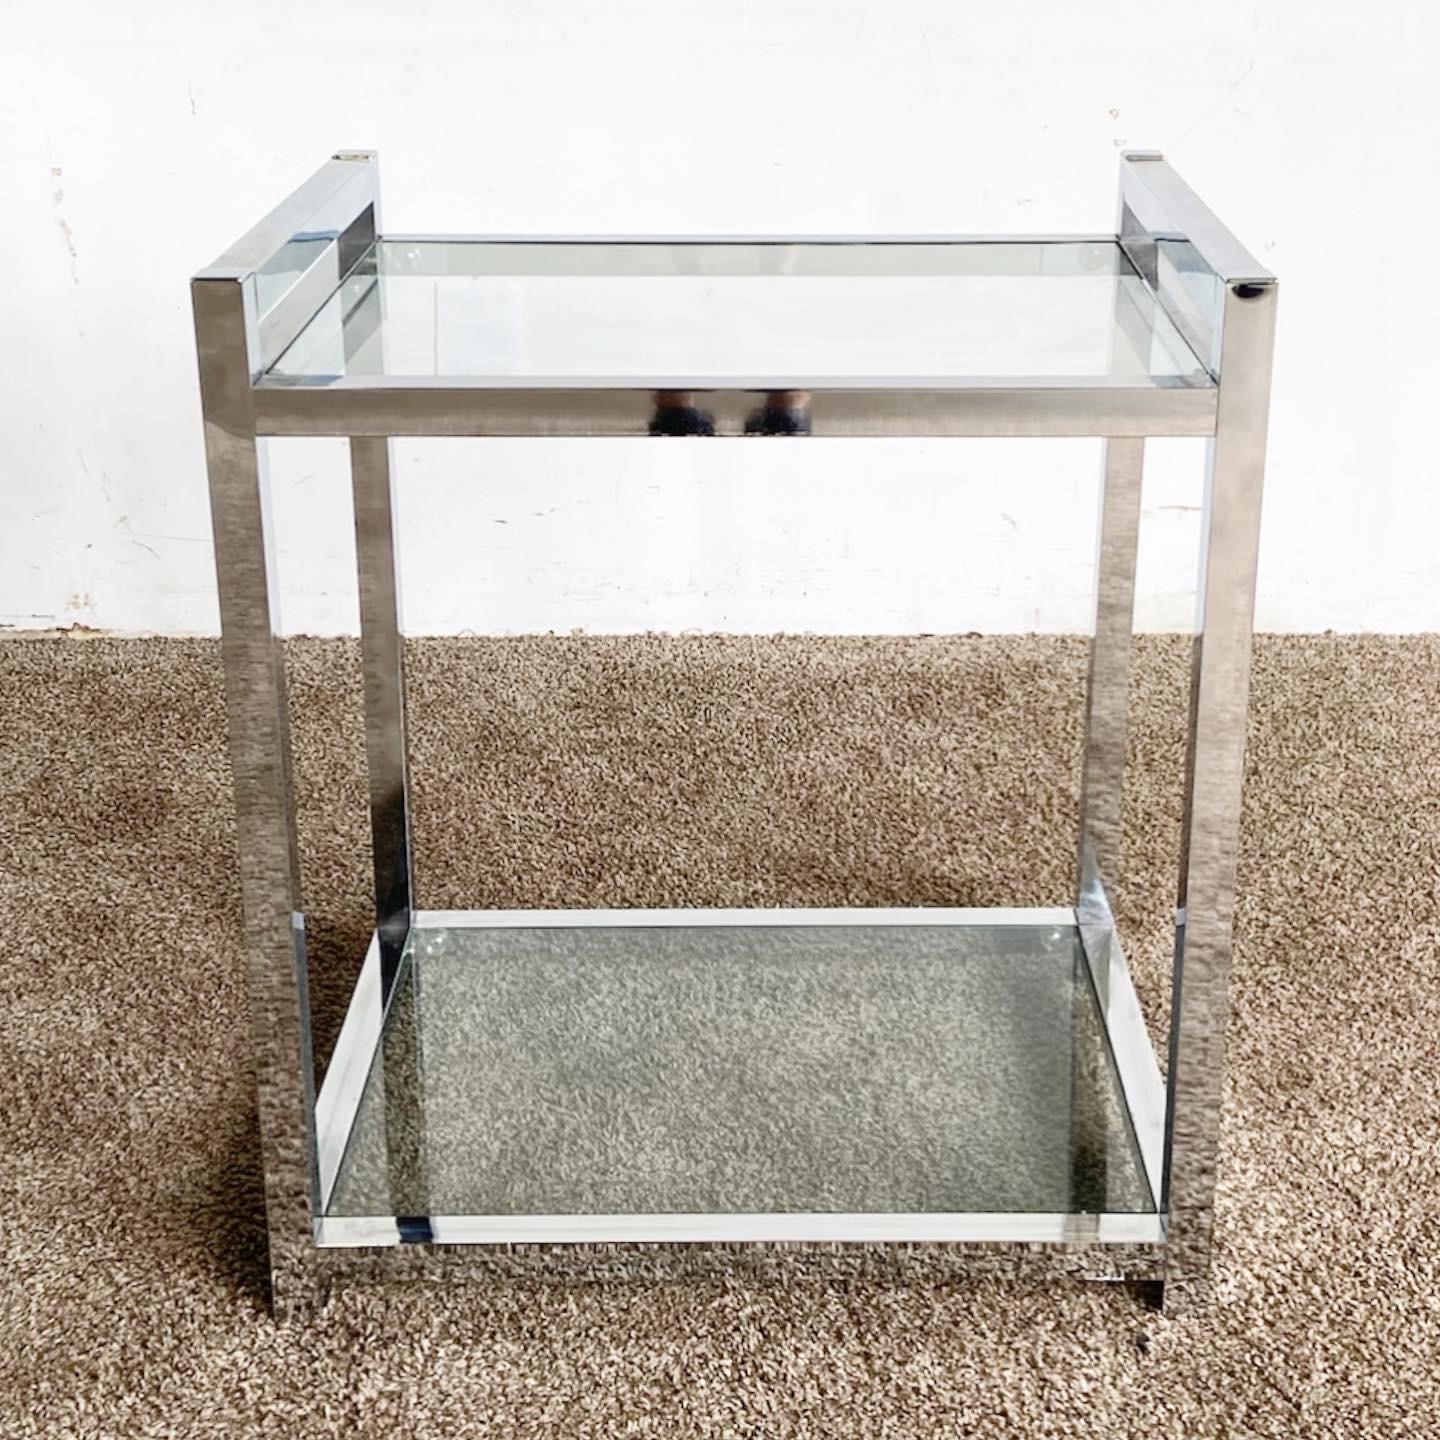 Experience mid-century charm with our Modern Chrome 2 Tier Side Table, blending sleek sophistication with functionality for a stylish addition to any space.

Features a sturdy chrome frame reflecting the minimalist aesthetic of the mid-century